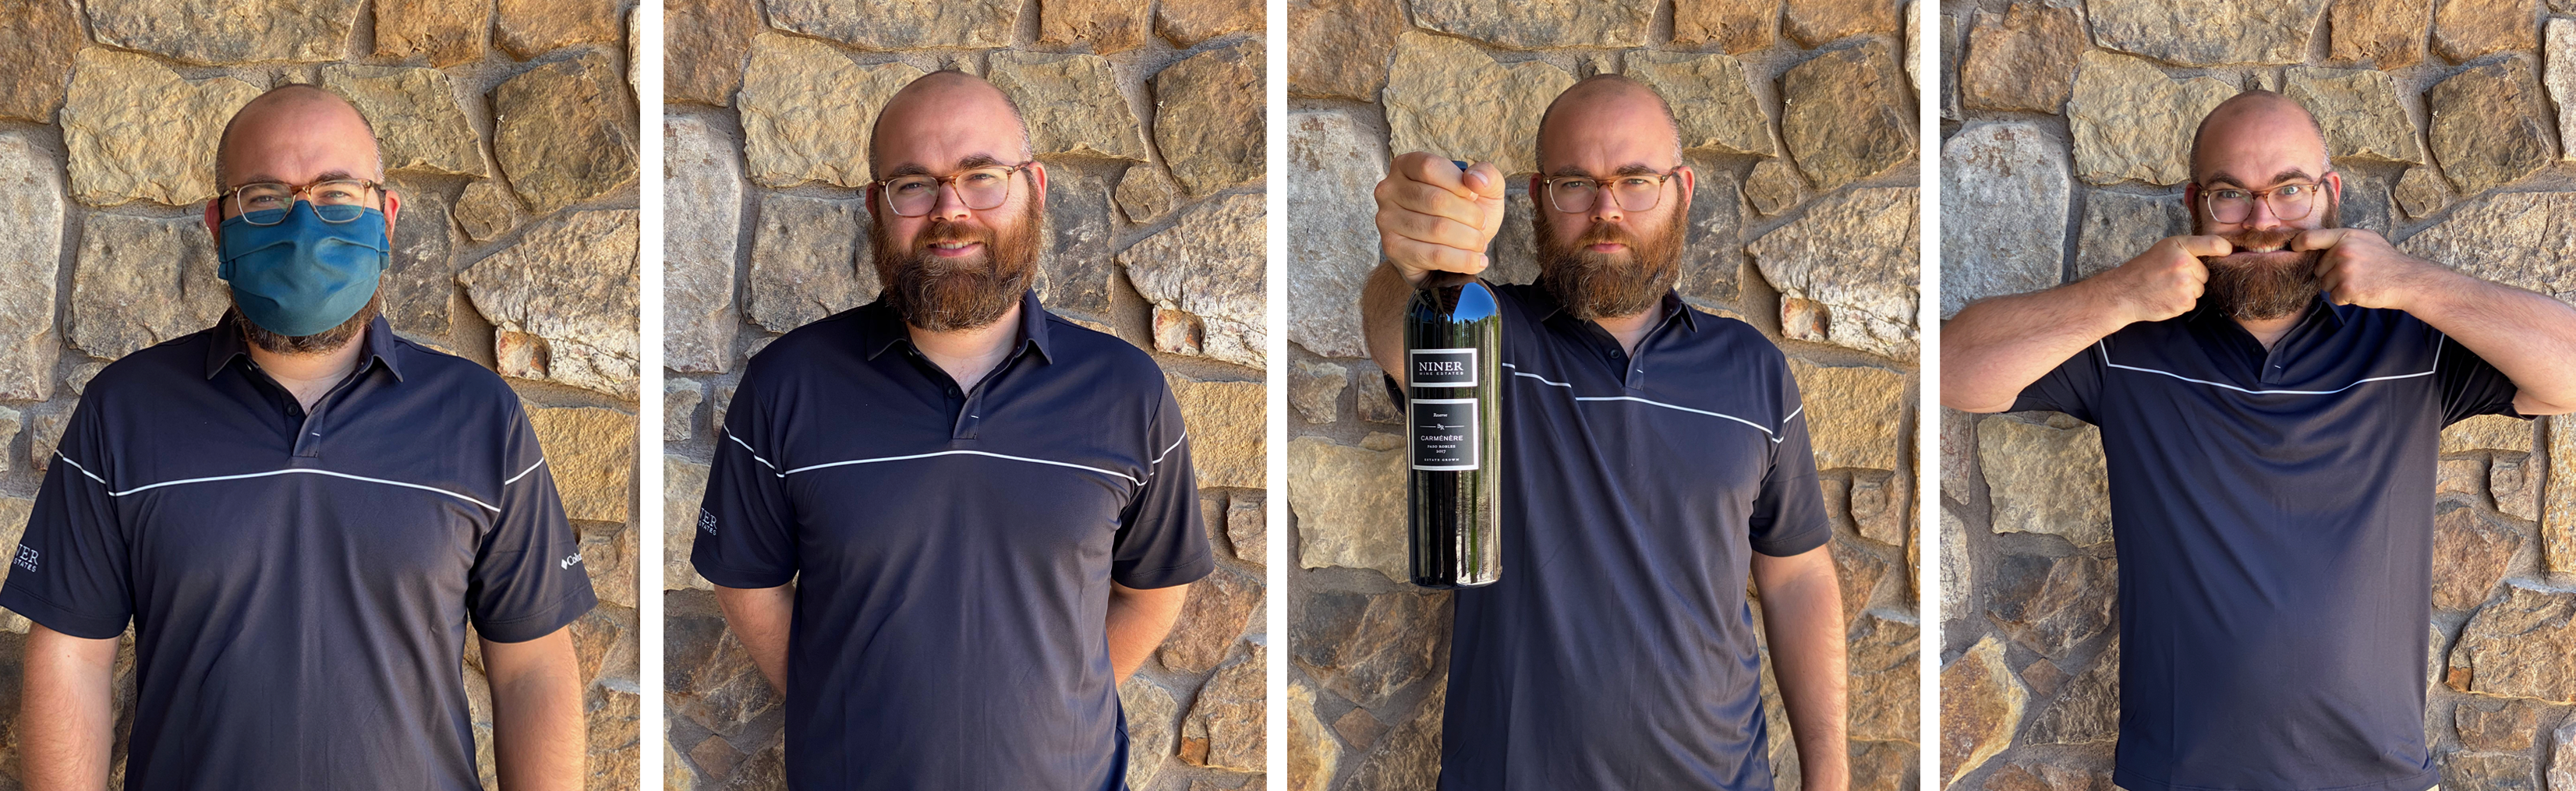 4 photos lined up: Eric in a mask, Eric smiling, Eric holding a bottle of Carmenere and Eric Making a funny face.